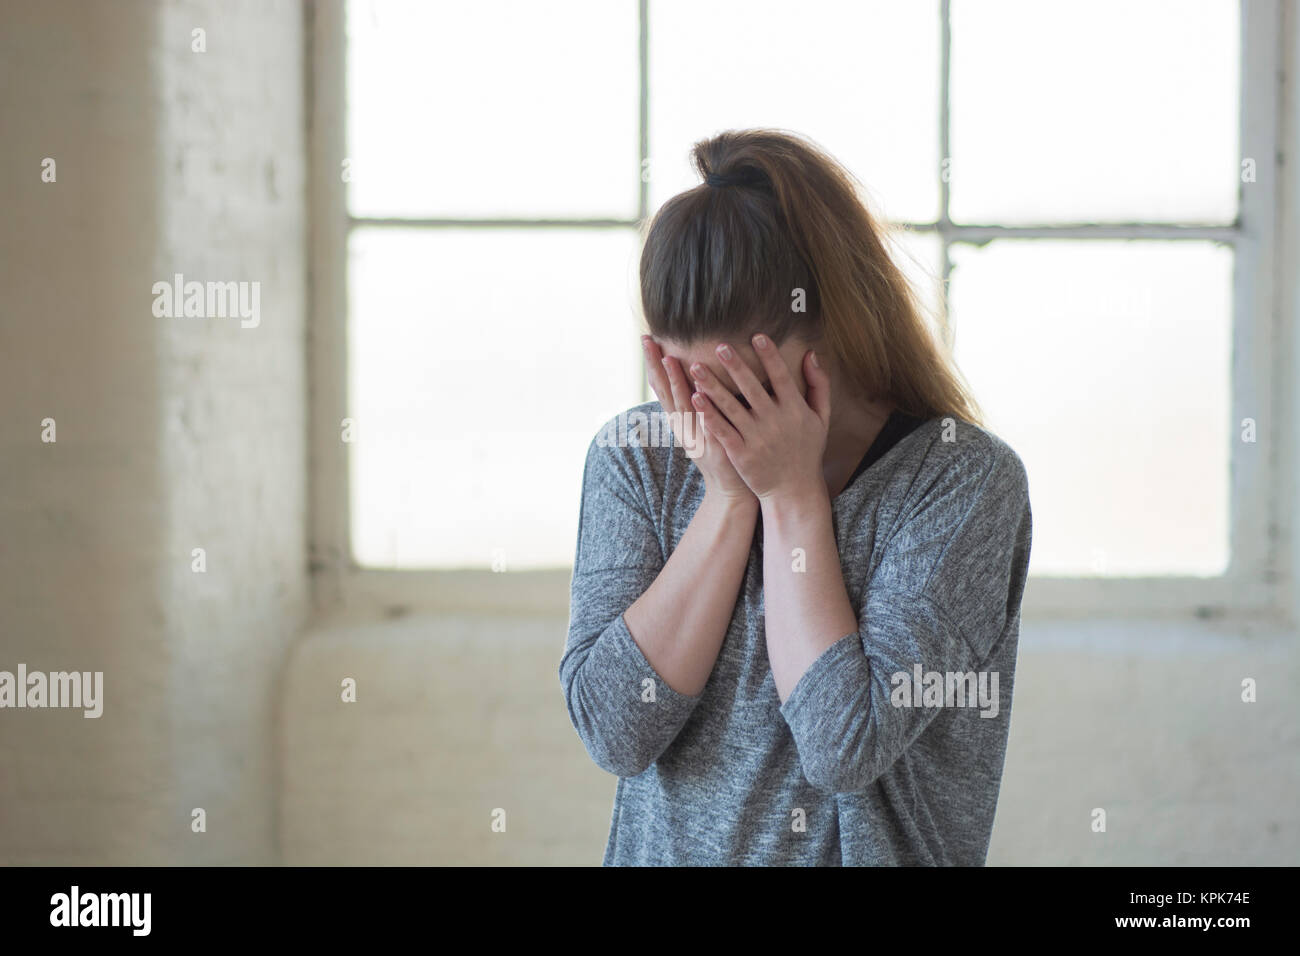 Upset young woman hiding face with hands crying by the window Stock Photo